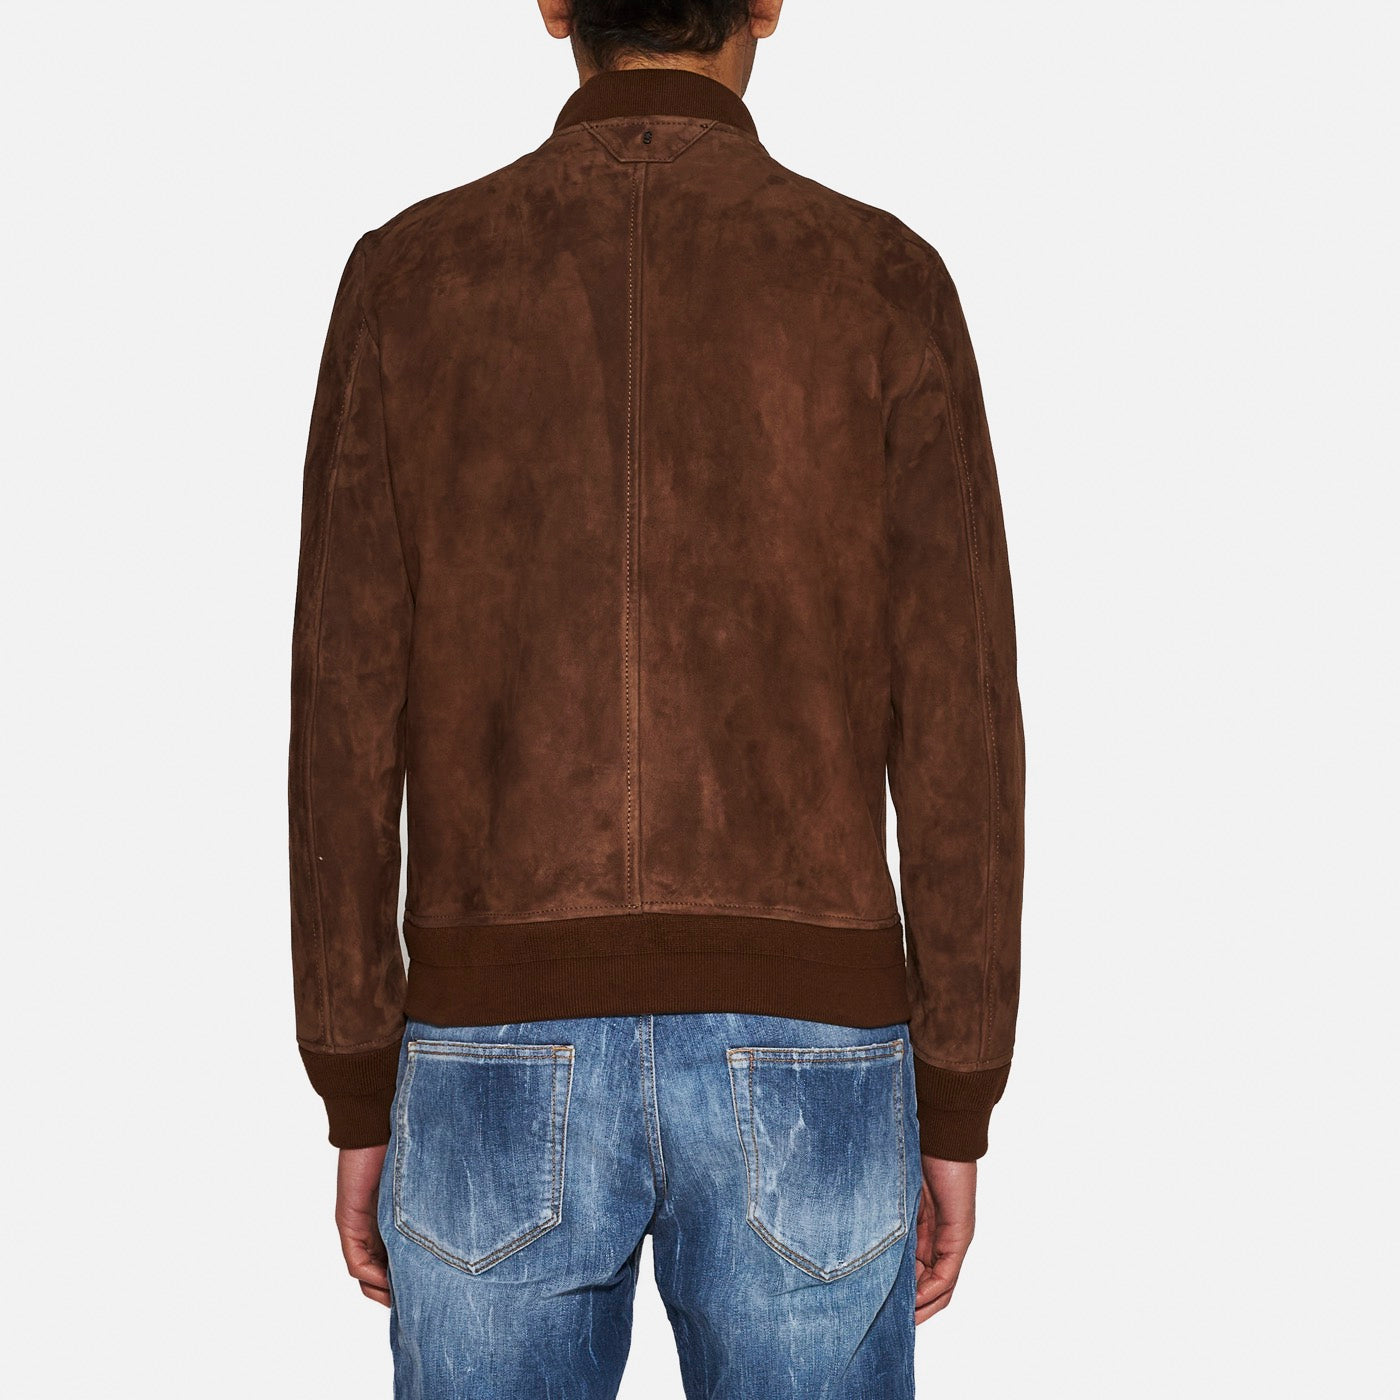 GIACCA BOMBER - BROWN